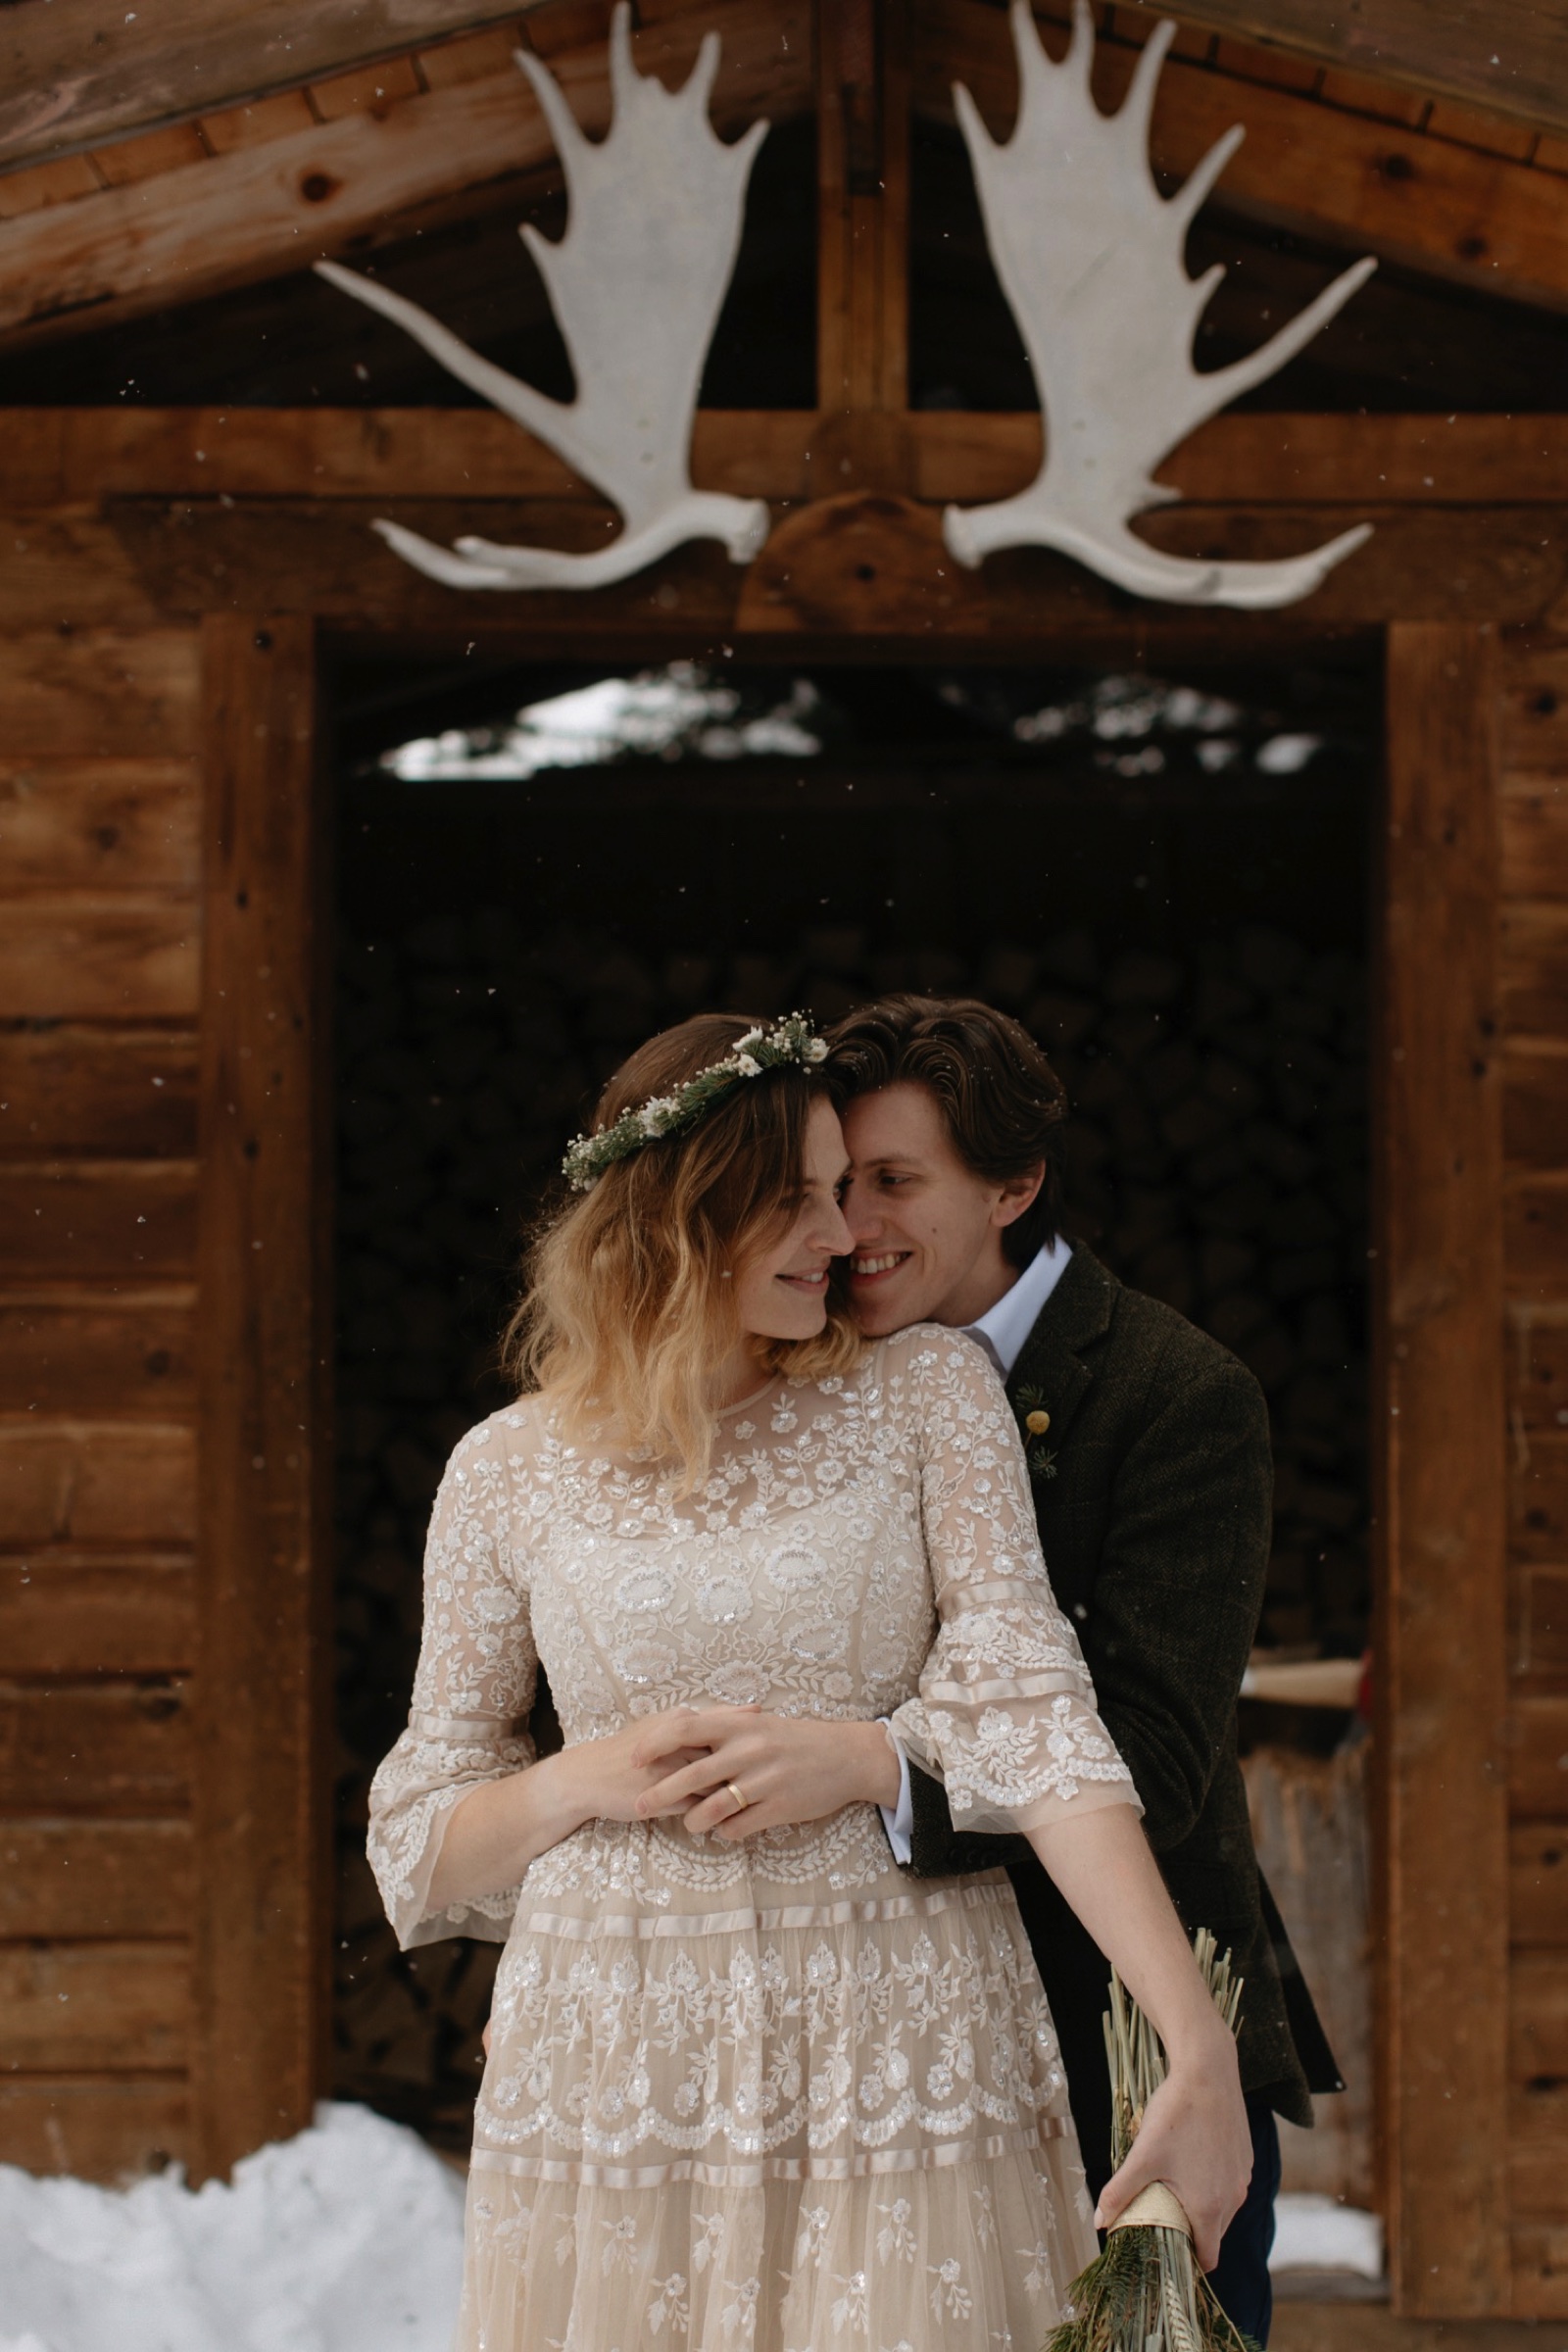 Rustic and timeless portrait of a wedding couple with the bride wearing a sequenced Needle and Thread dress and handmade floral crown